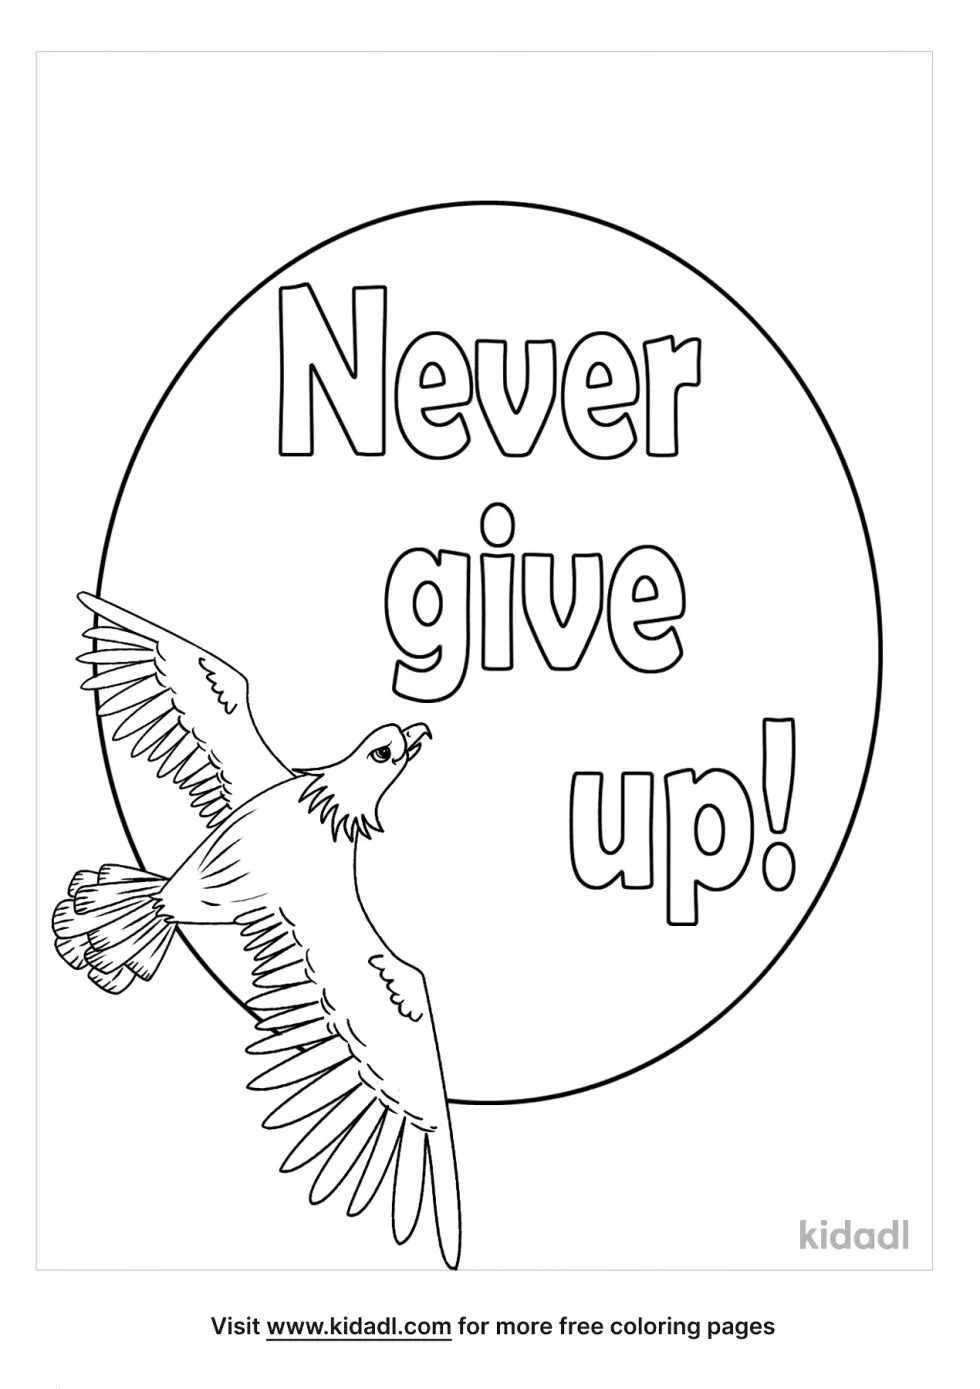 S Never Give Up!